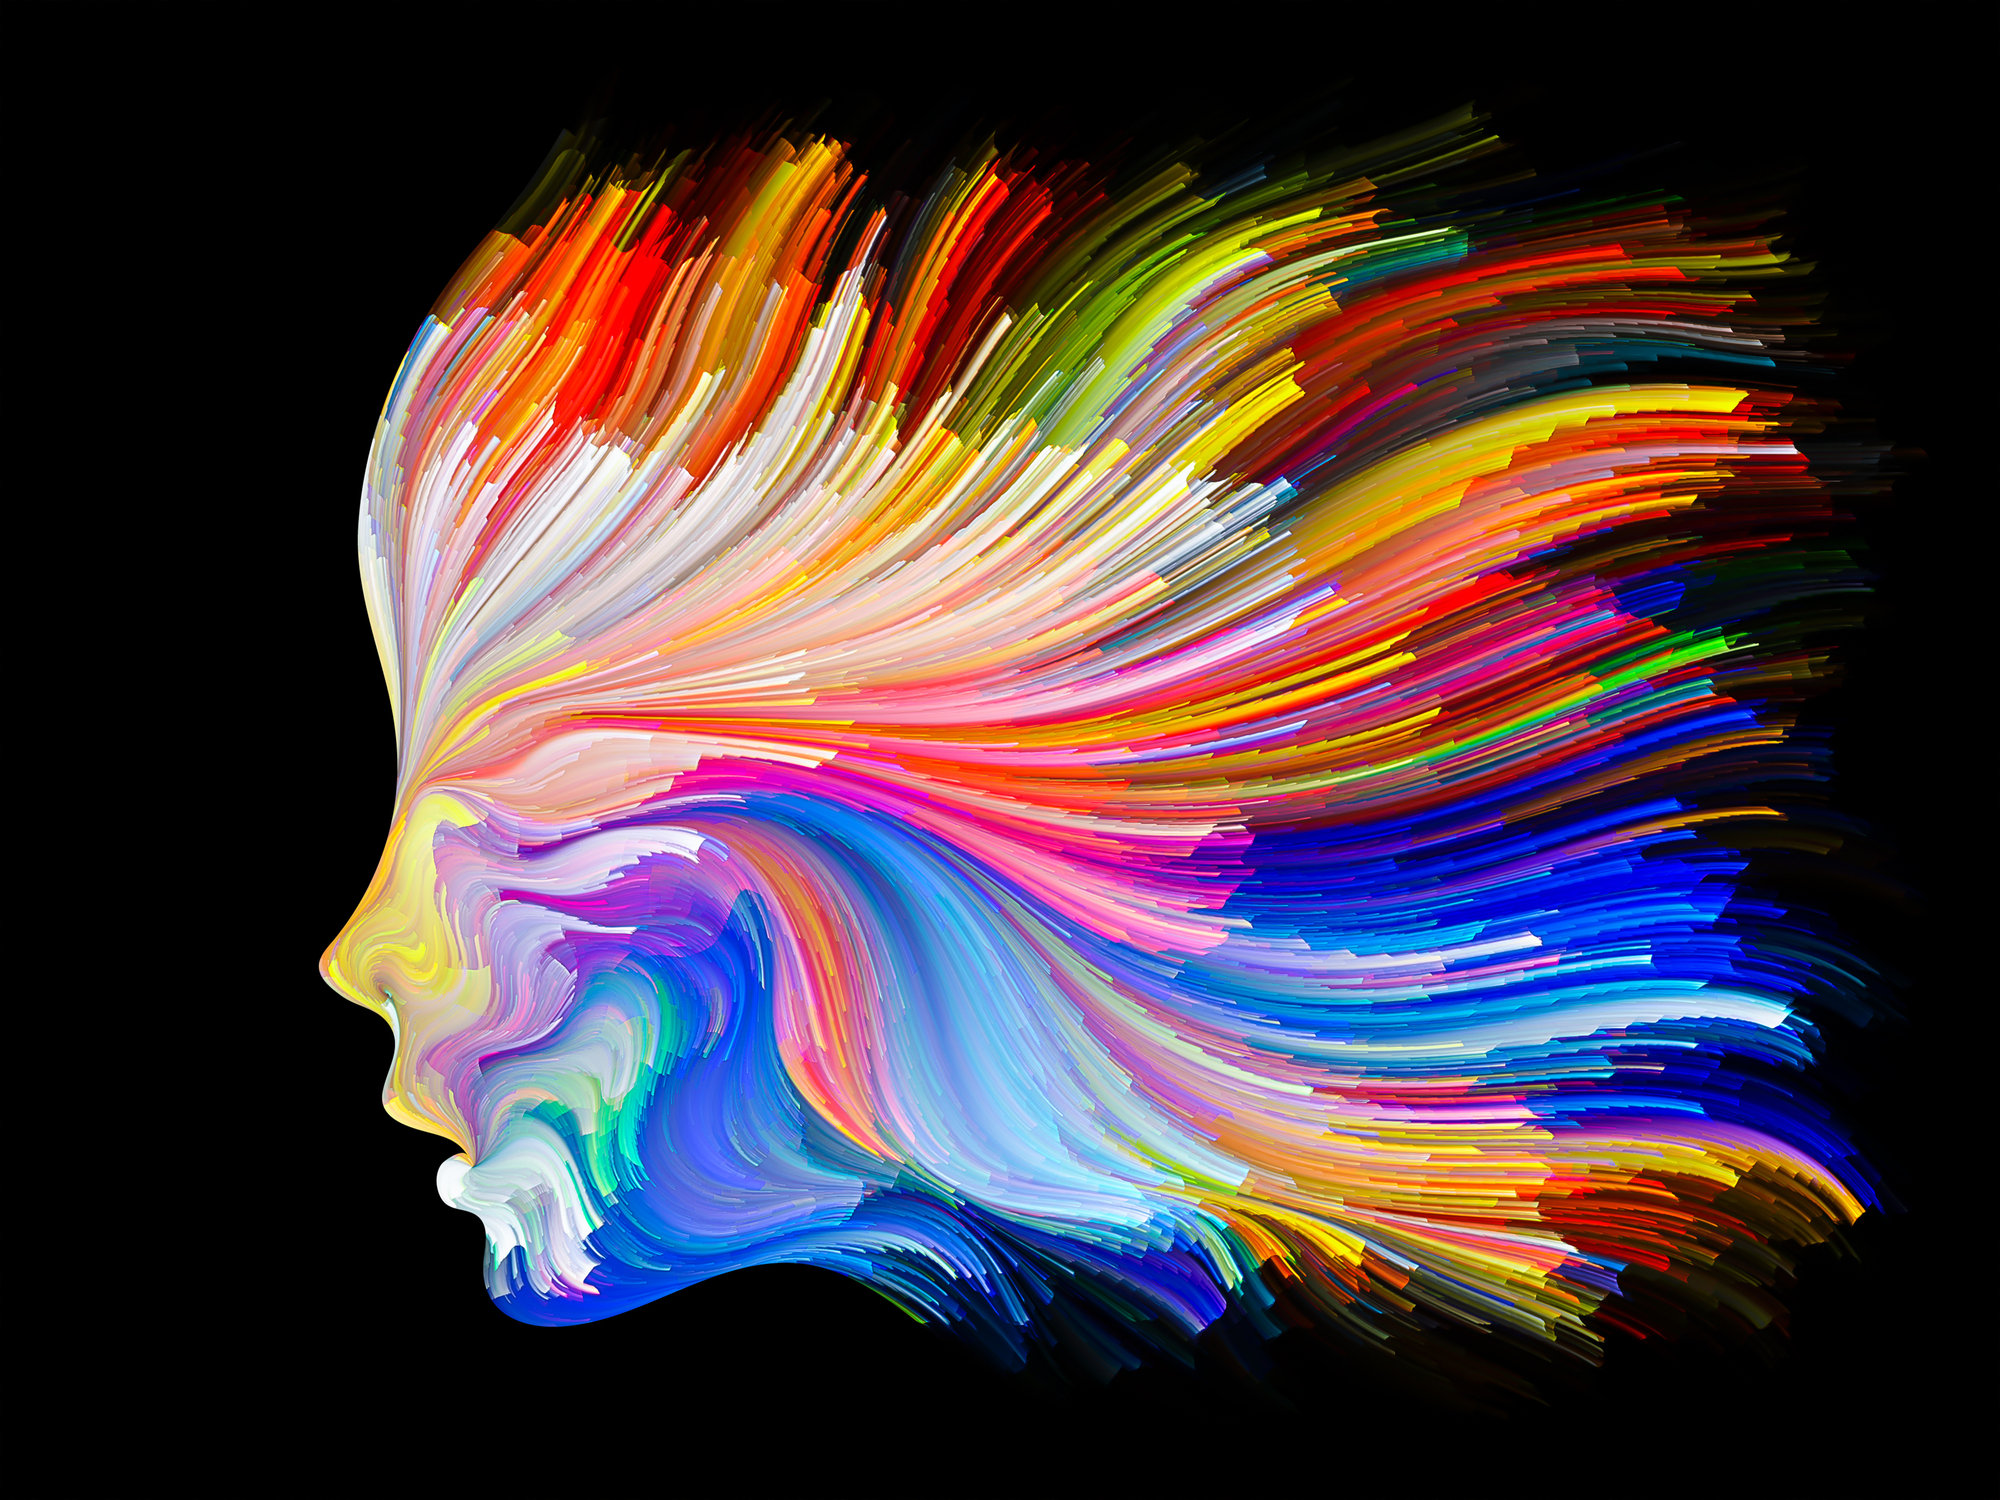 abstract profile of face on black background with multiple colors streaming out of it